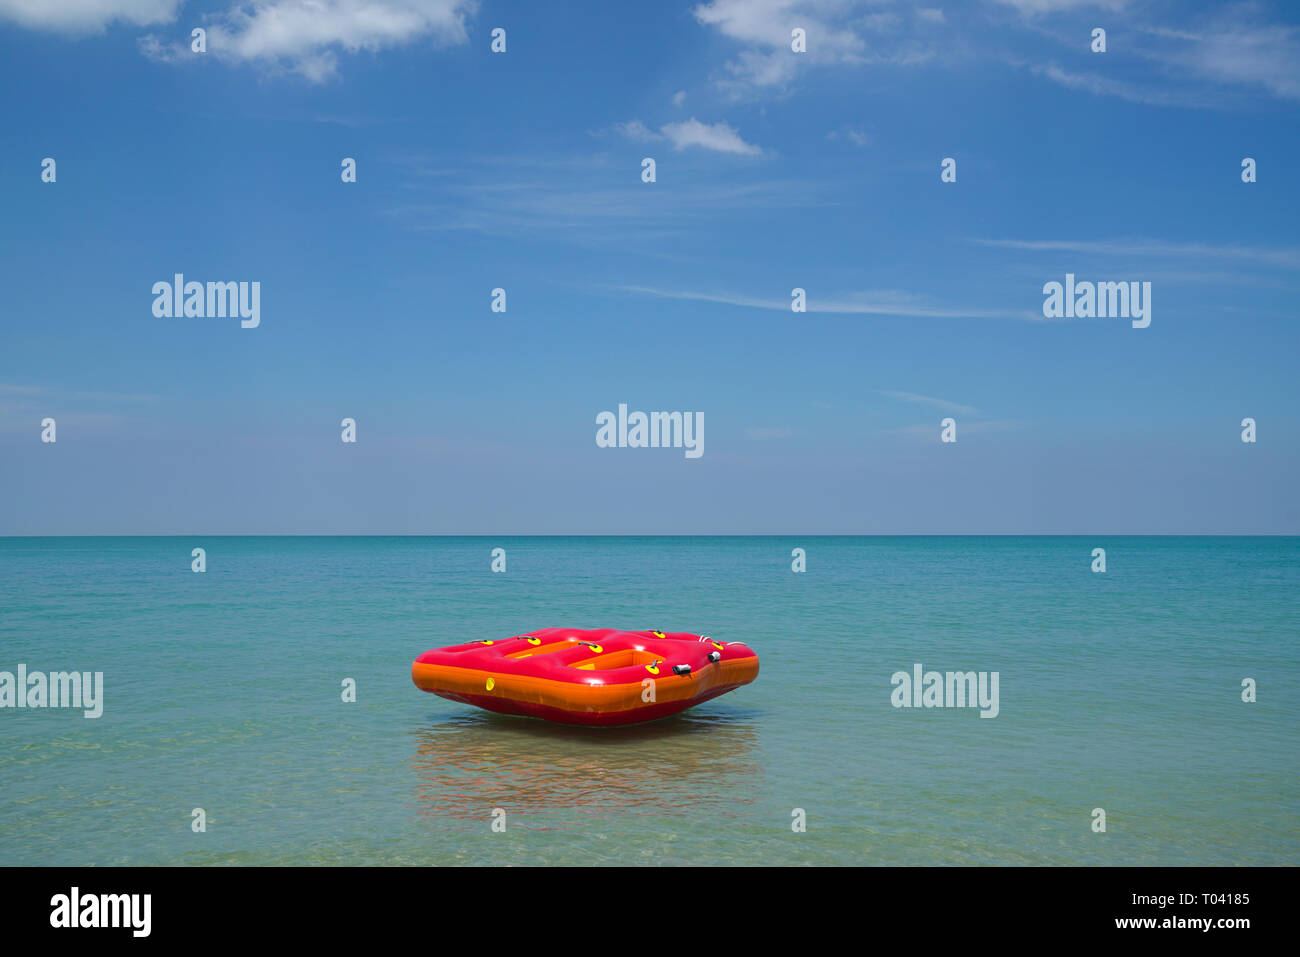 Summer or vacation concept, Inflatable ring or lilo floating in the sea by the beach Stock Photo